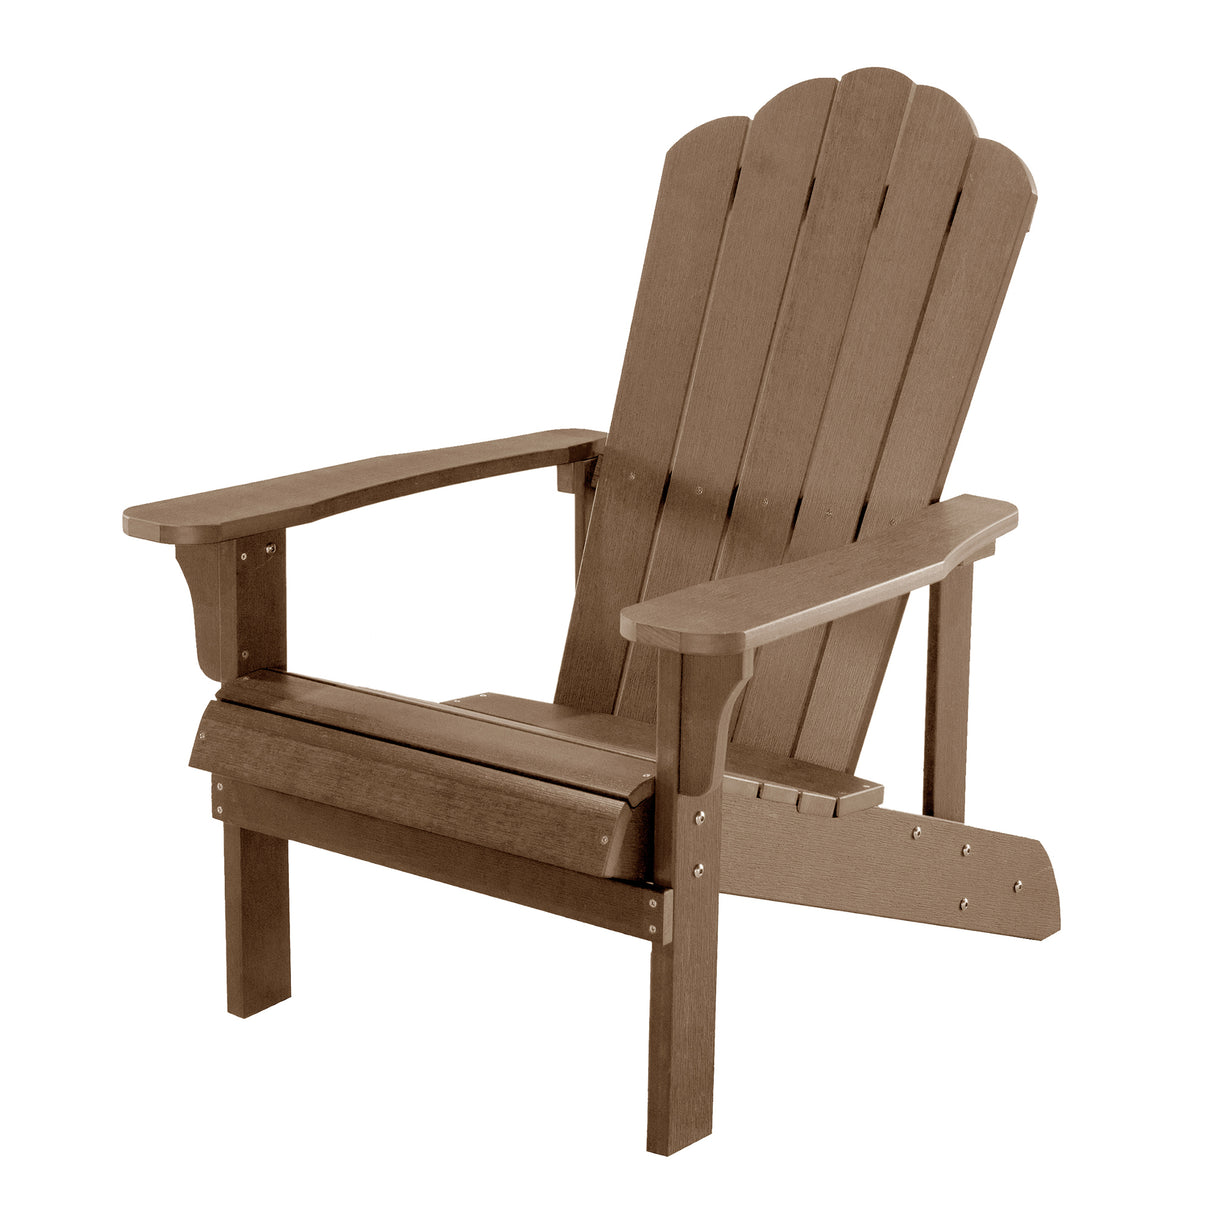 Key West 3 Piece Outdoor Patio All-Weather Plastic Wood Adirondack Bistro Set, 2 Adirondack chairs, and 1 small, side, end table
set for Decks, Backyards, Gardens, Lawns, Poolside, and Beaches, Brown